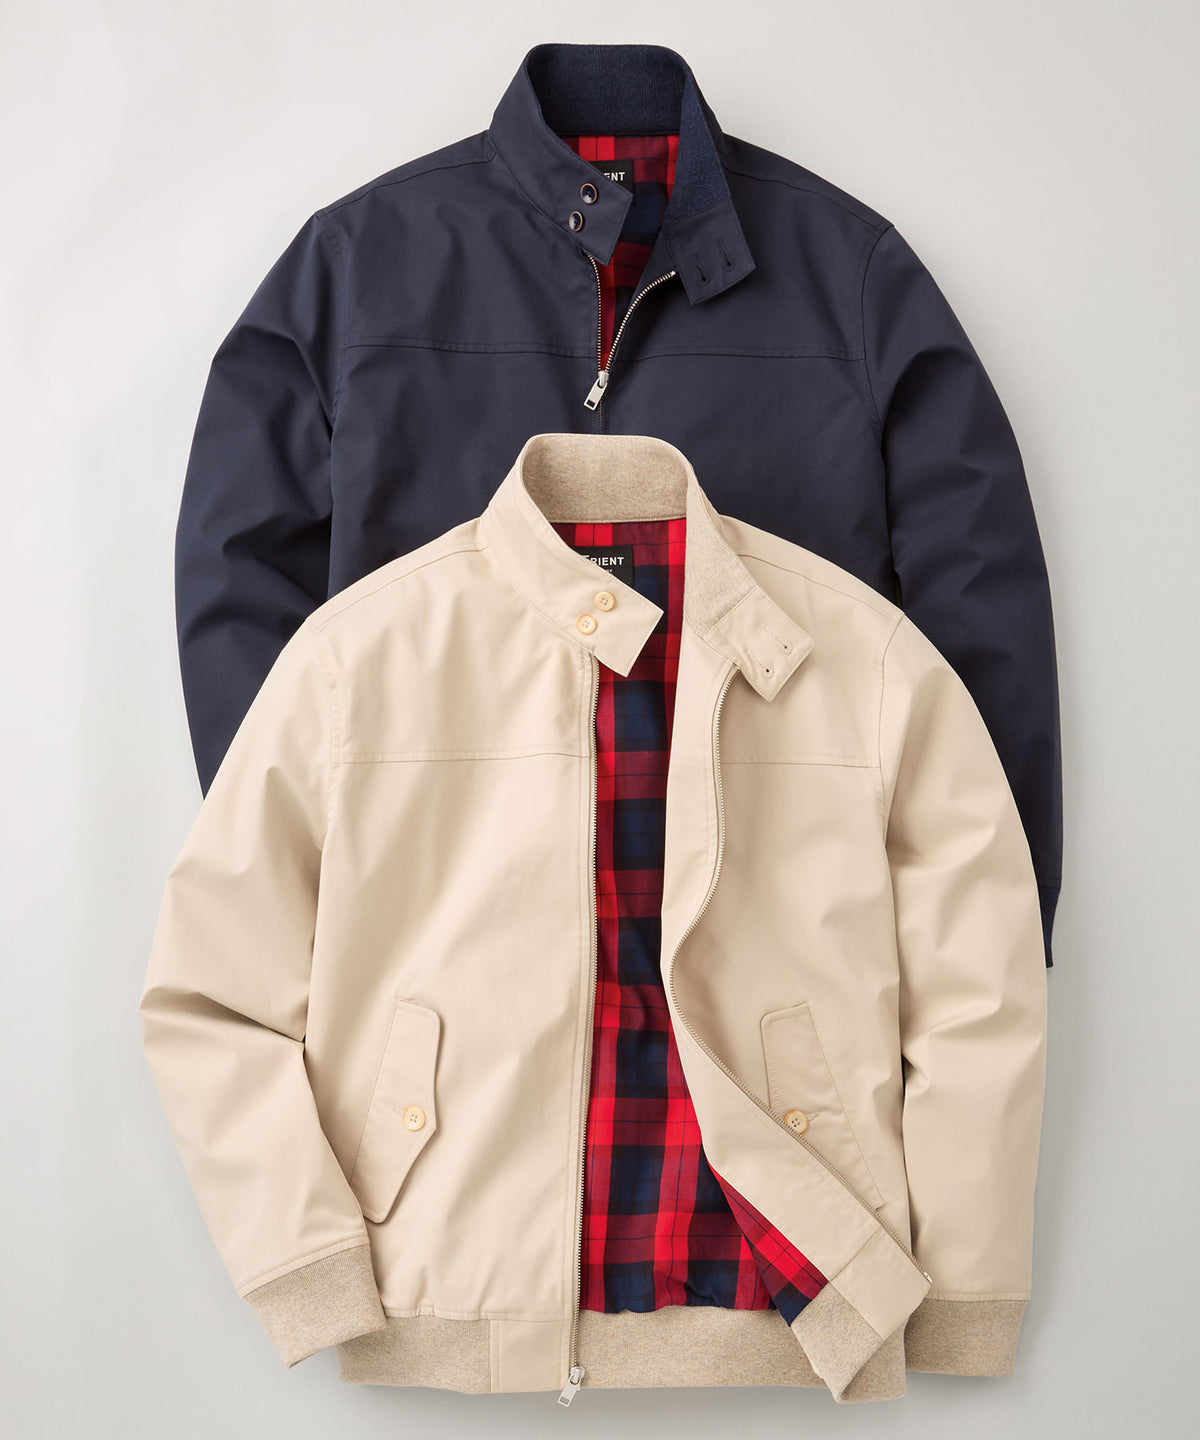 Golf Jacket With Plaid Lining